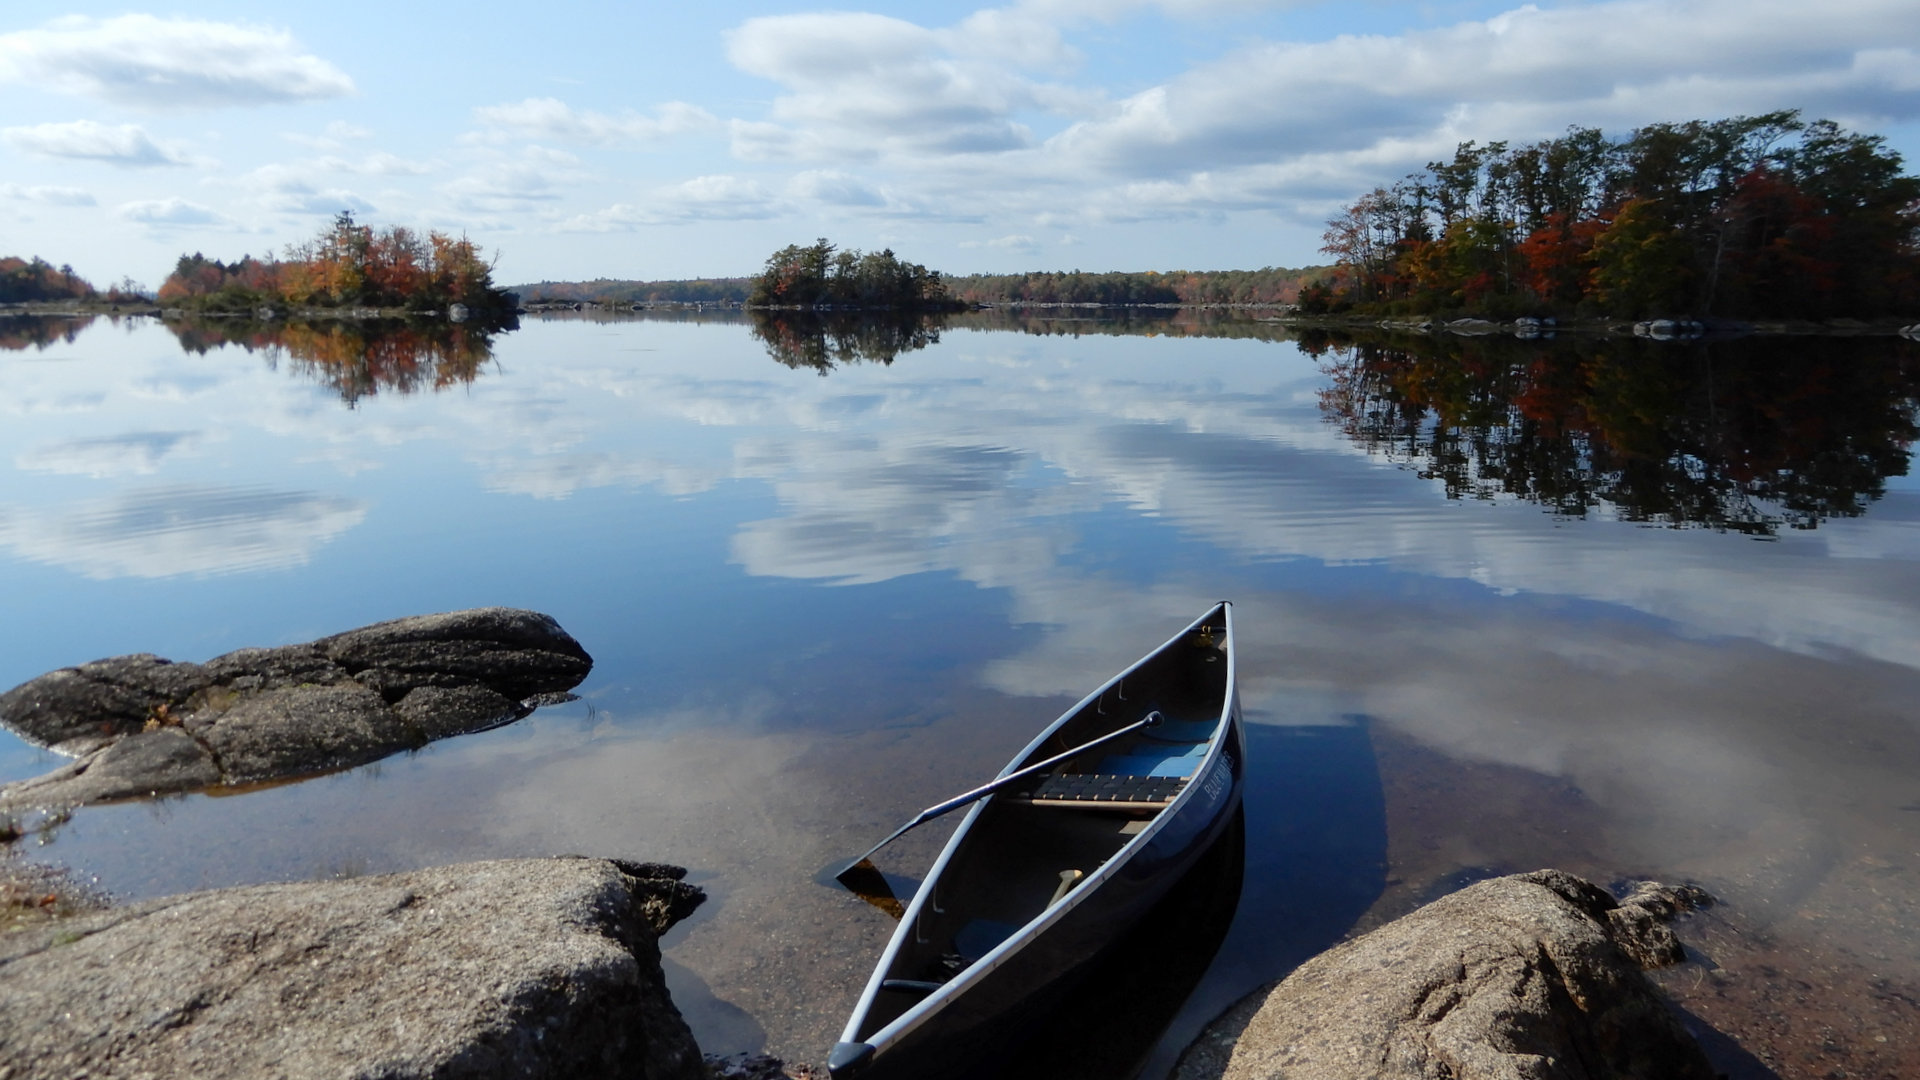 Gaspereau Lake, NS in fall stillness with a treasured Bluewater 16' 6" kevlar canoe and bent 8 gm carbon fibre paddle.